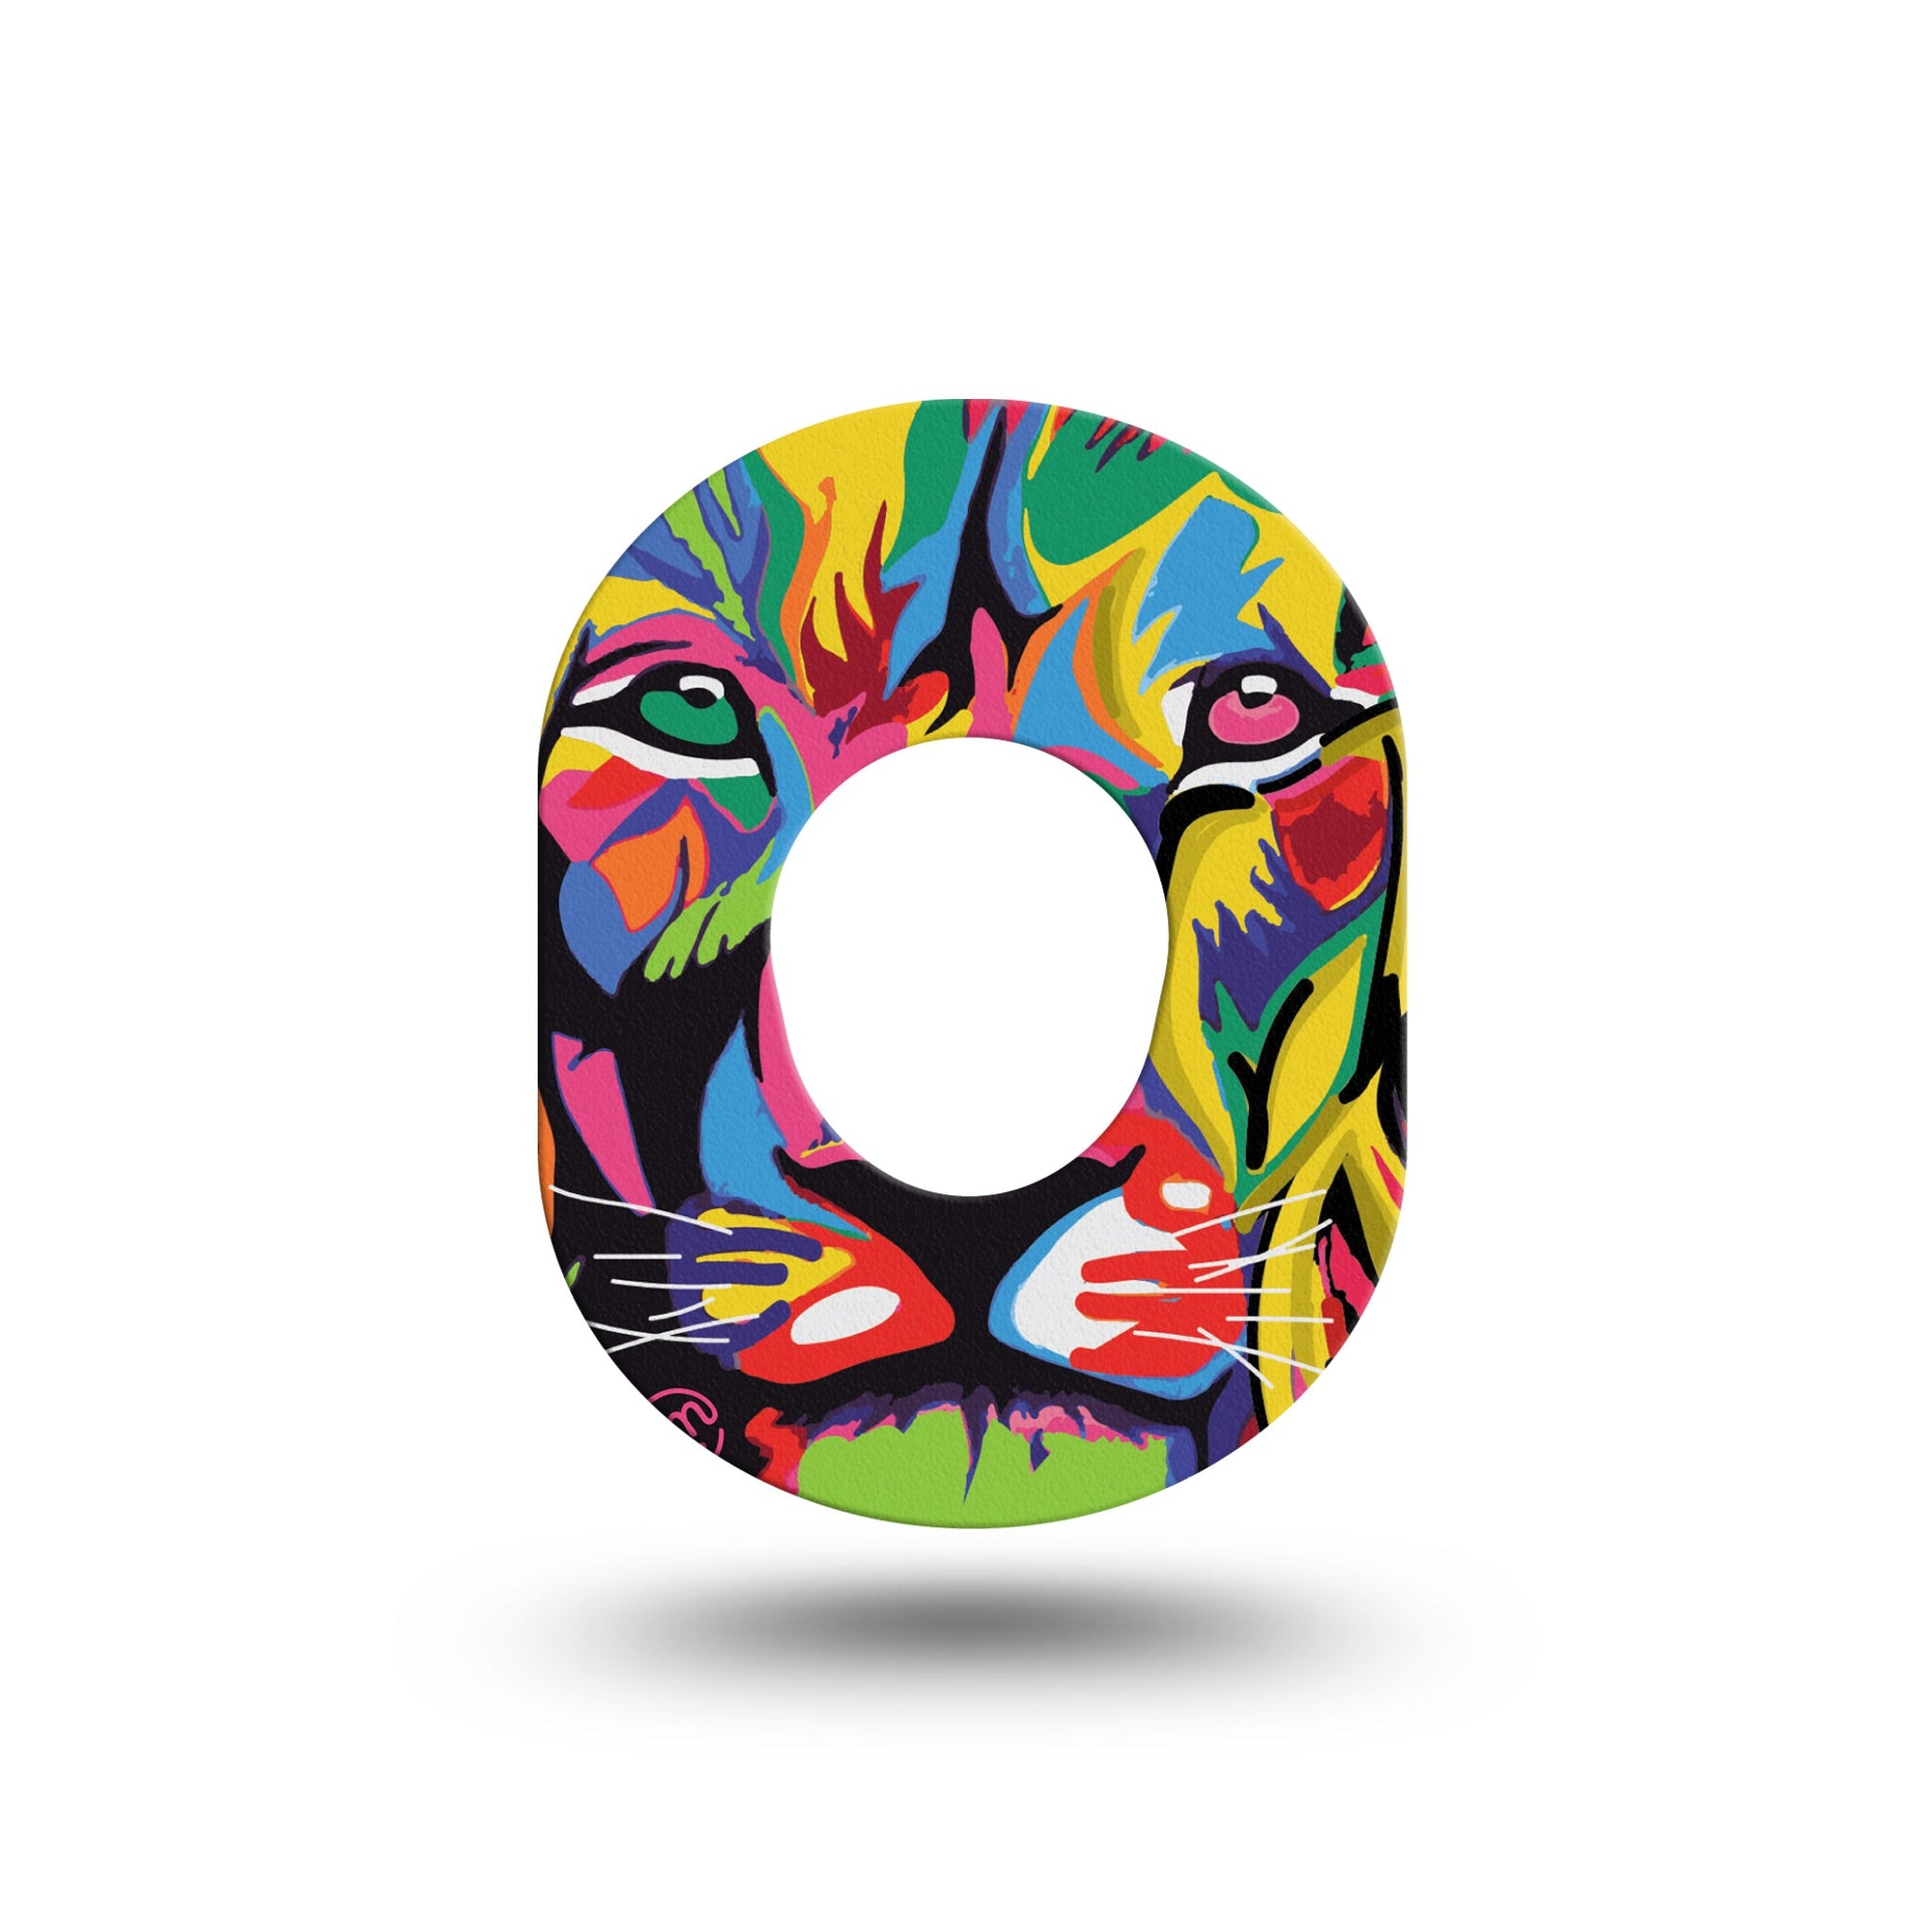 ExpressionMed ExpressionMed, Majestic Lion Dexcom G7 Mini Tape, Single, rainbow lion face fixing ring design